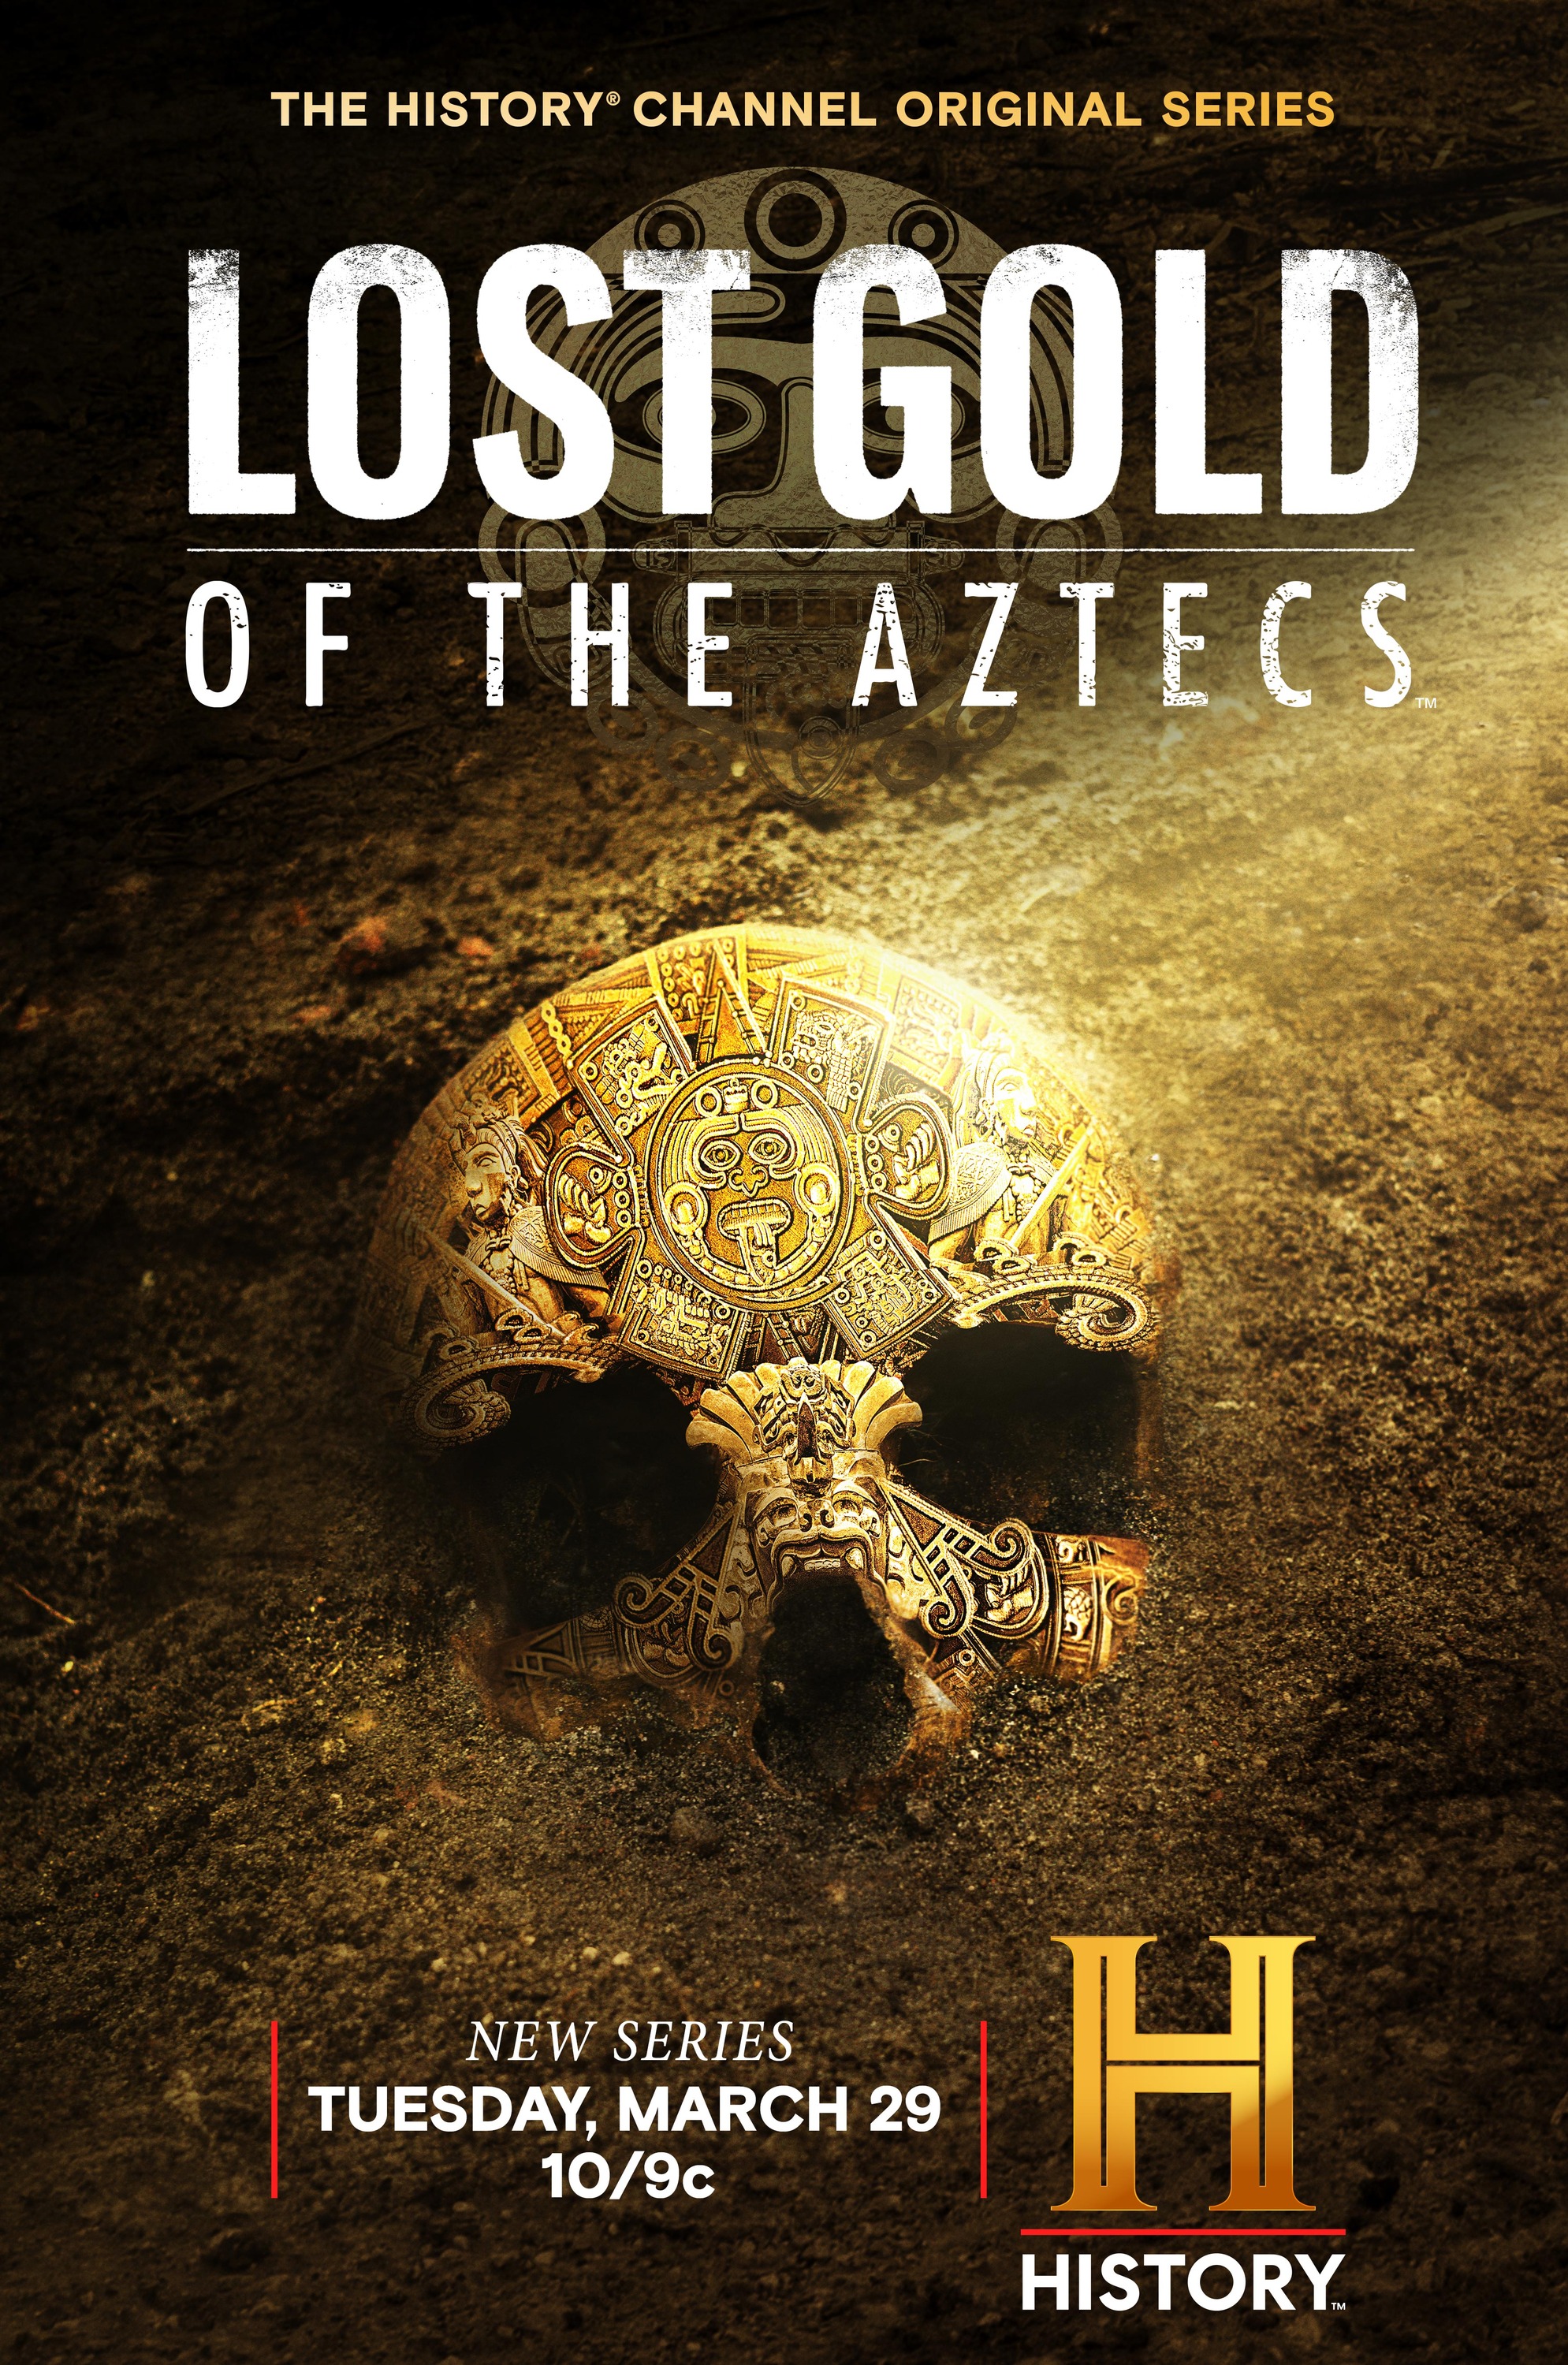 Mega Sized Movie Poster Image for Lost Gold of the Aztecs (#1 of 2)